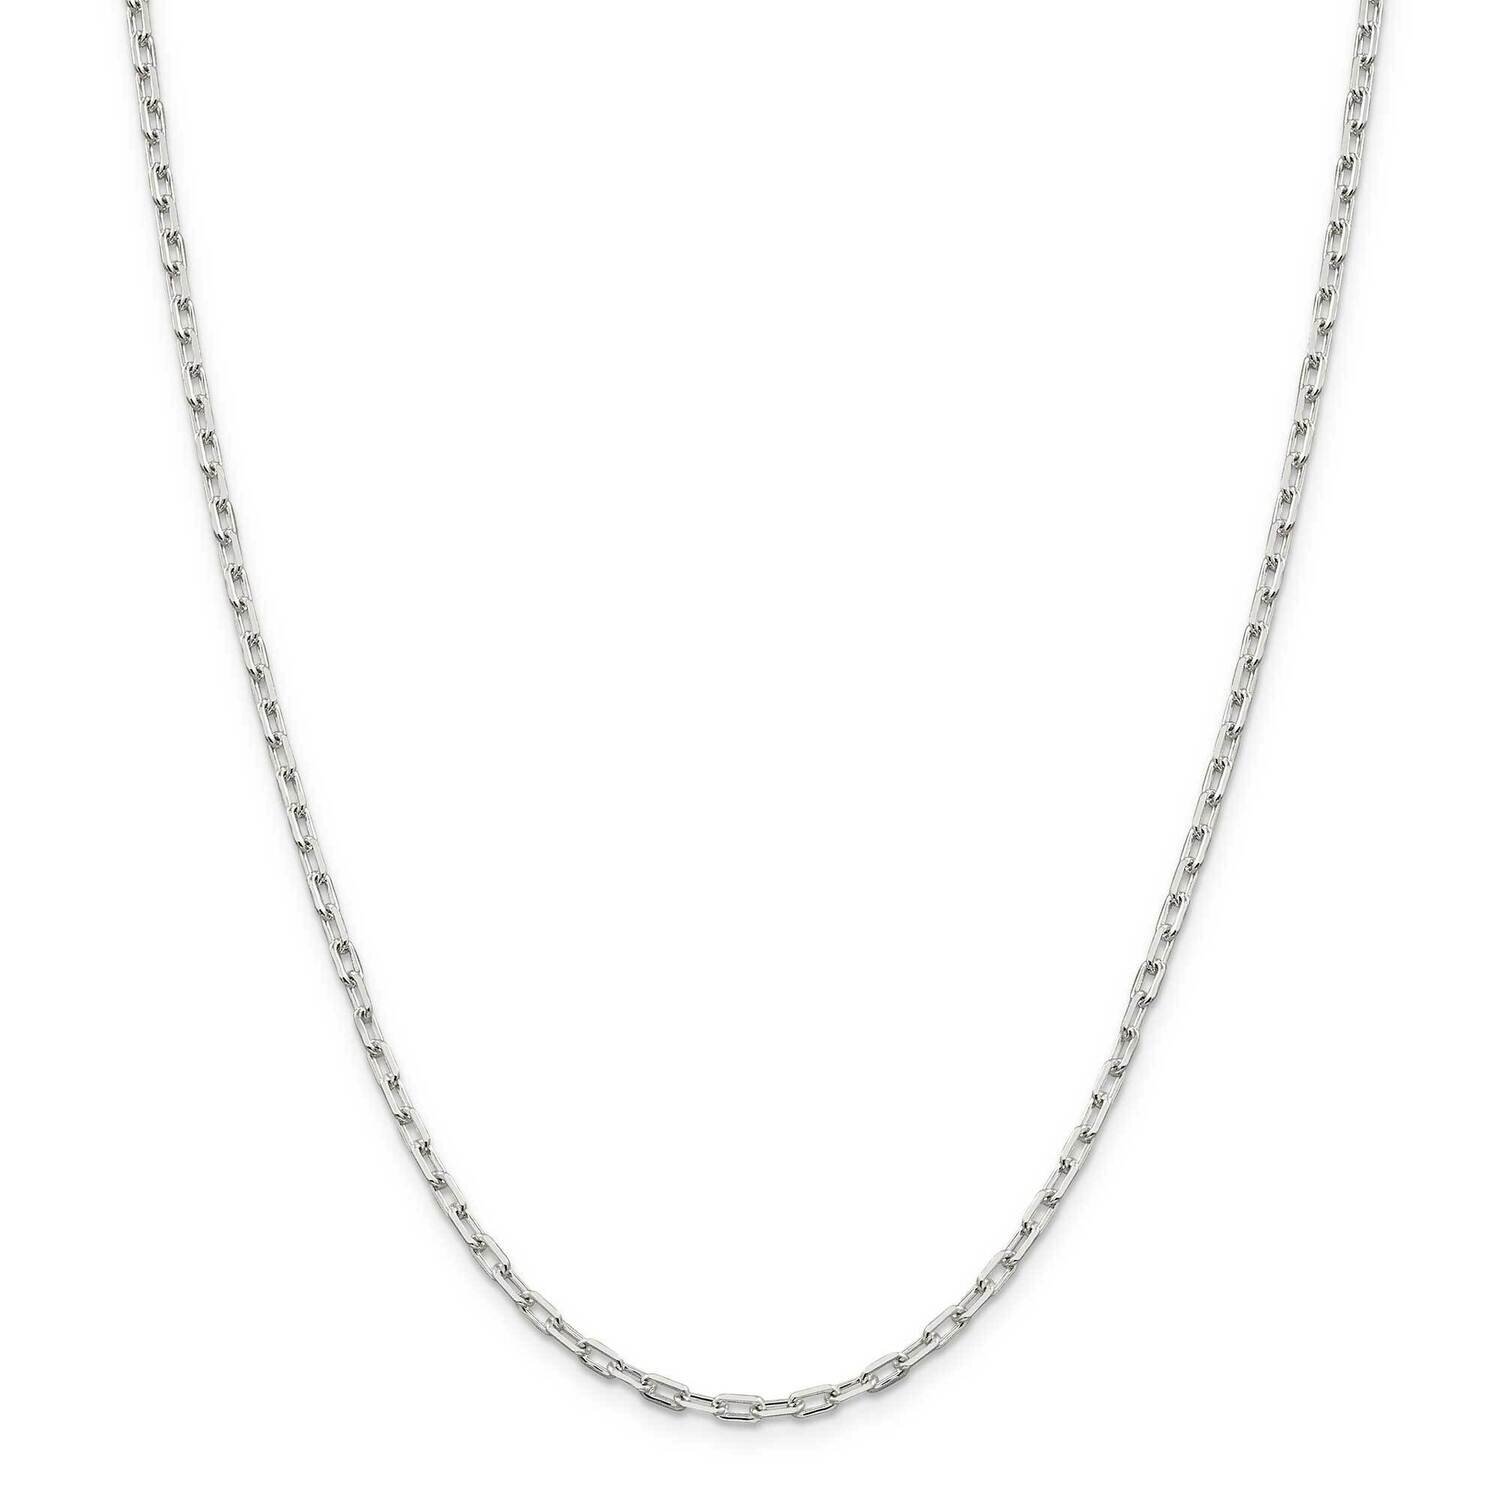 2.75mm Elongated Open Link Chain 36 Inch Sterling Silver QFC52-36